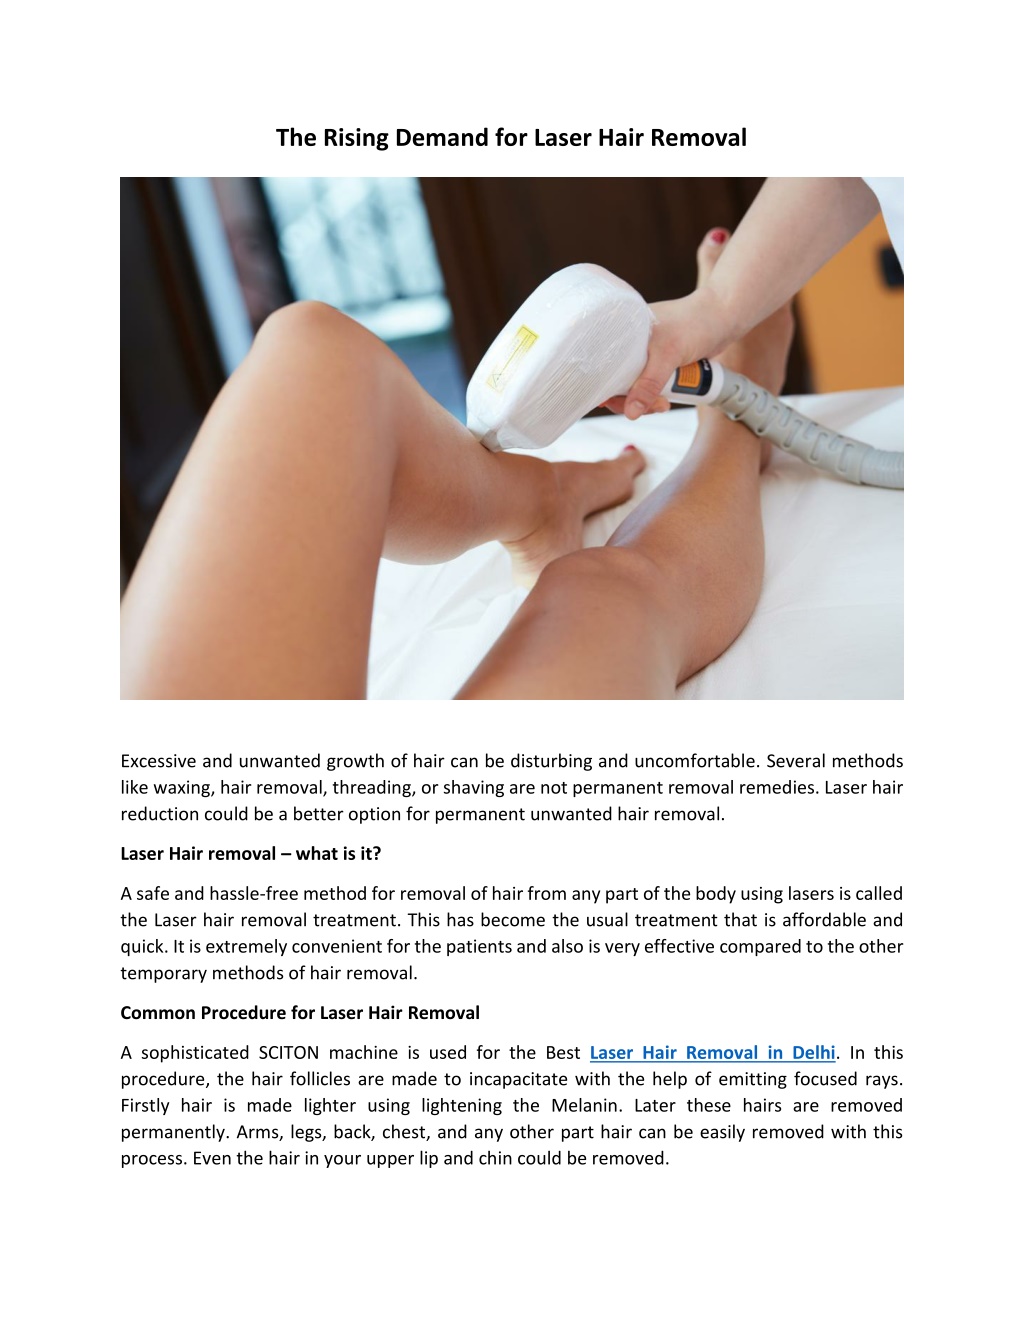 PPT - The Rising Demand for Laser Hair Removal PowerPoint Presentation -  ID:10017945